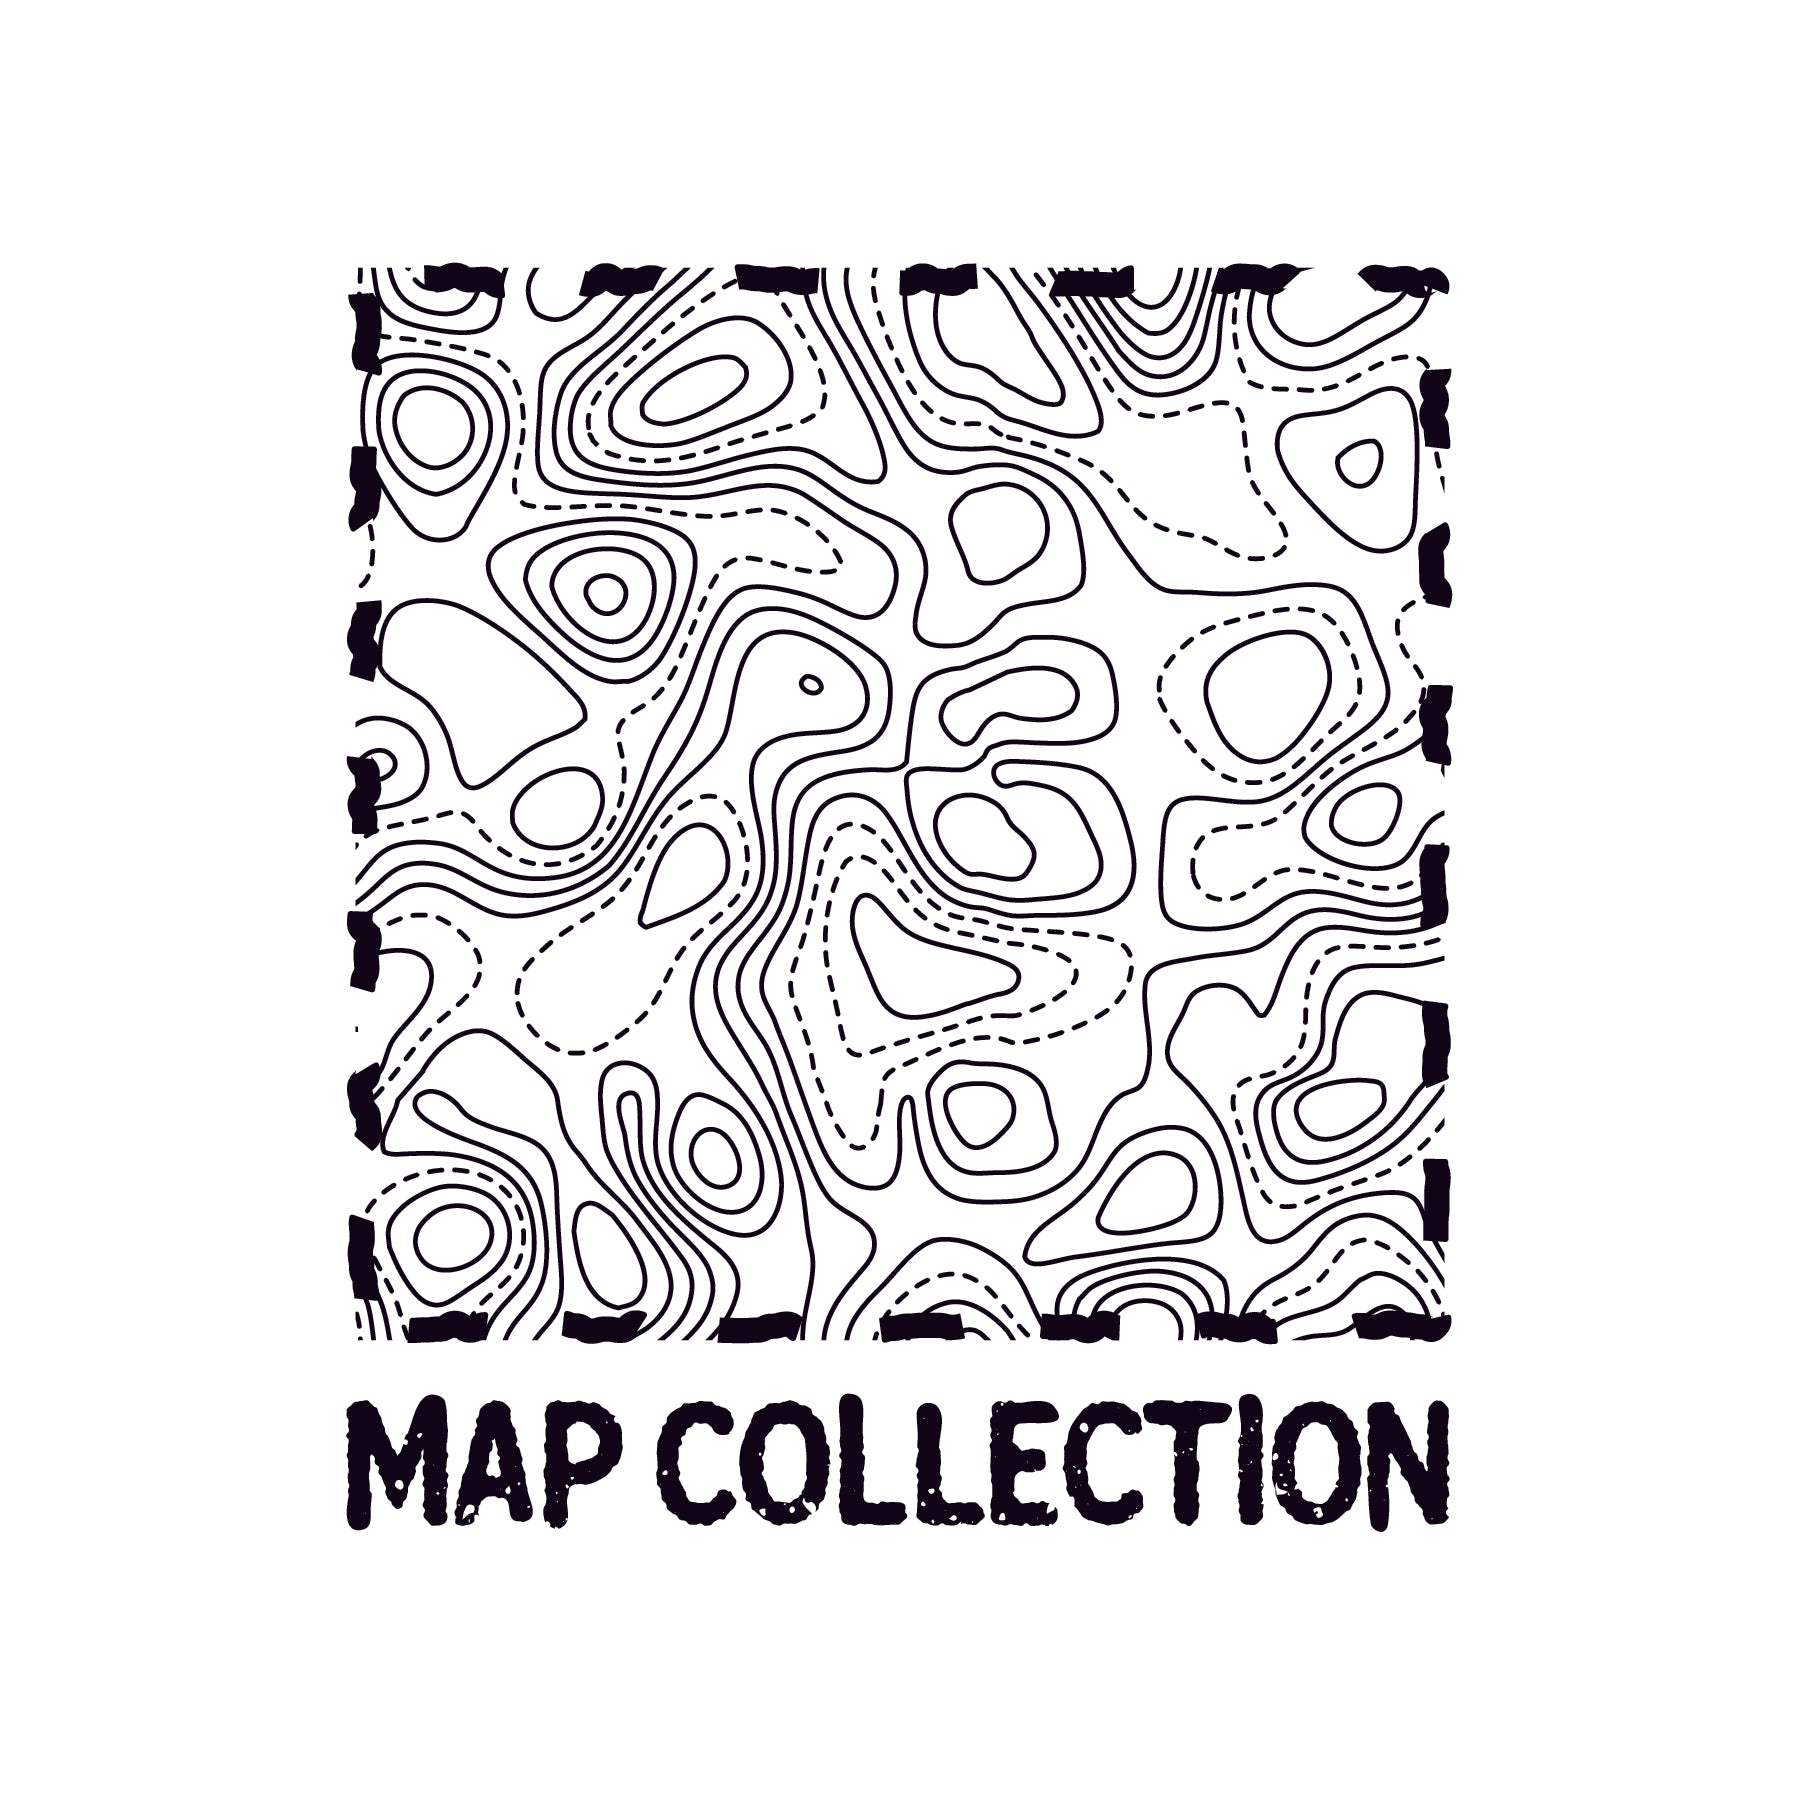 4. Maps Collection